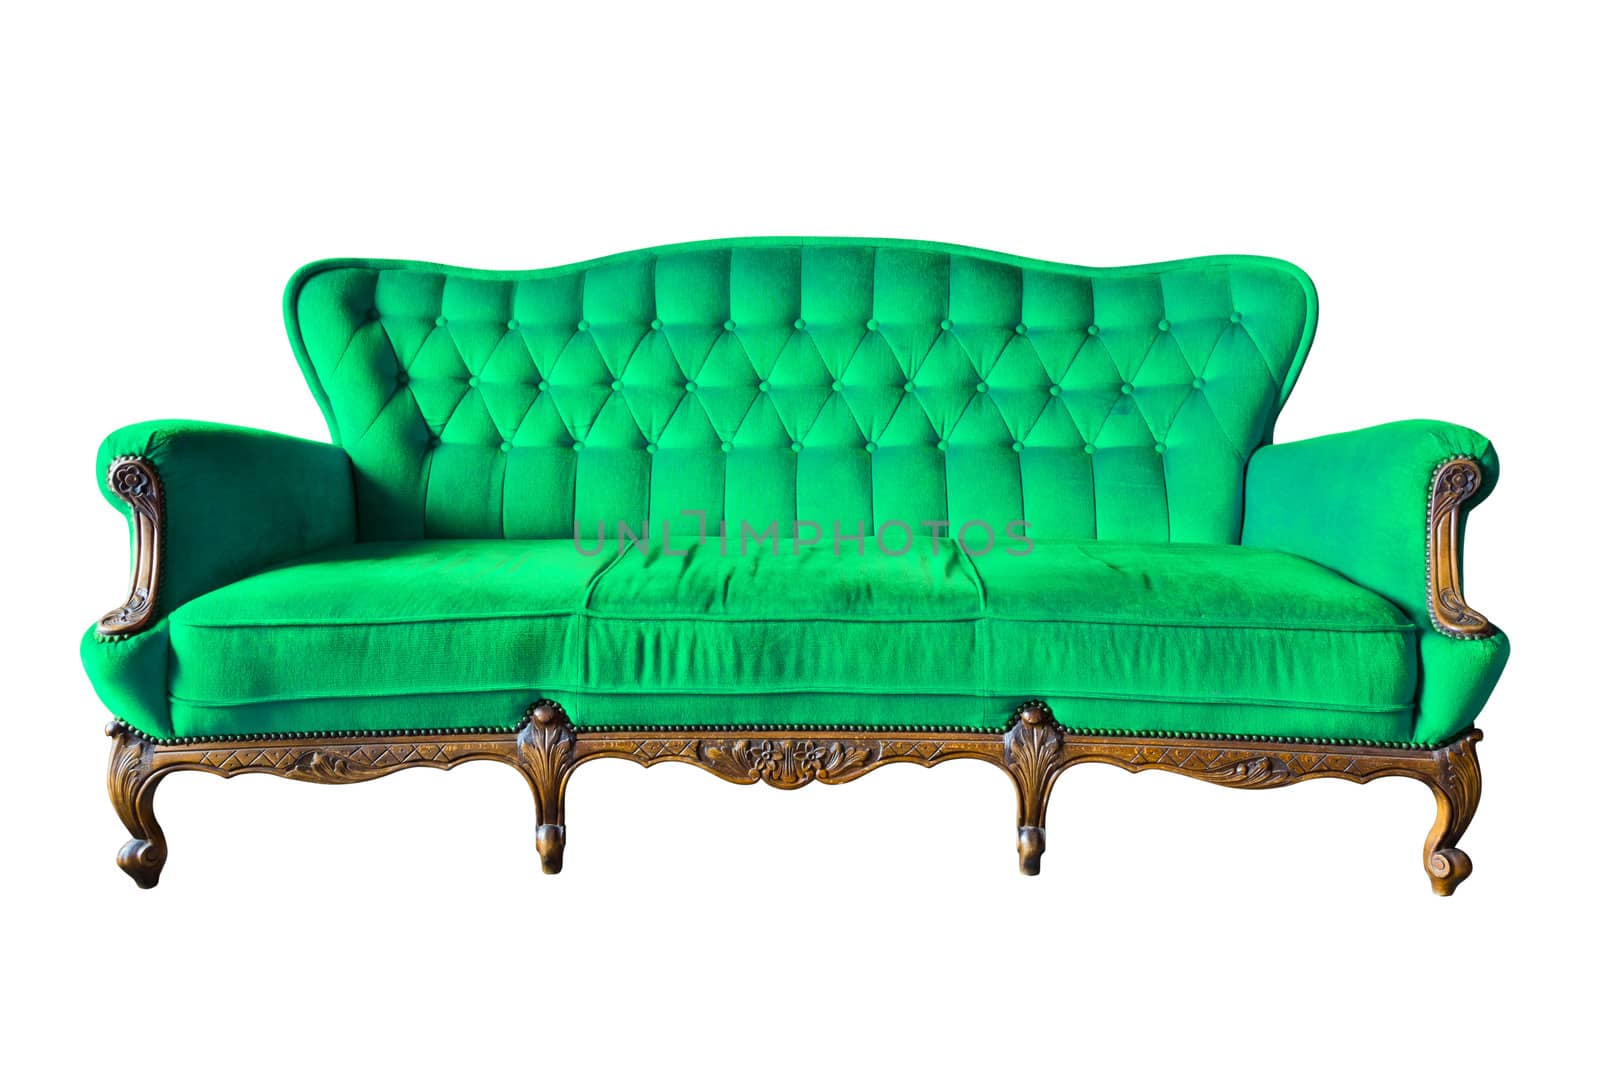 vintage green luxury armchair isolated with clipping path
